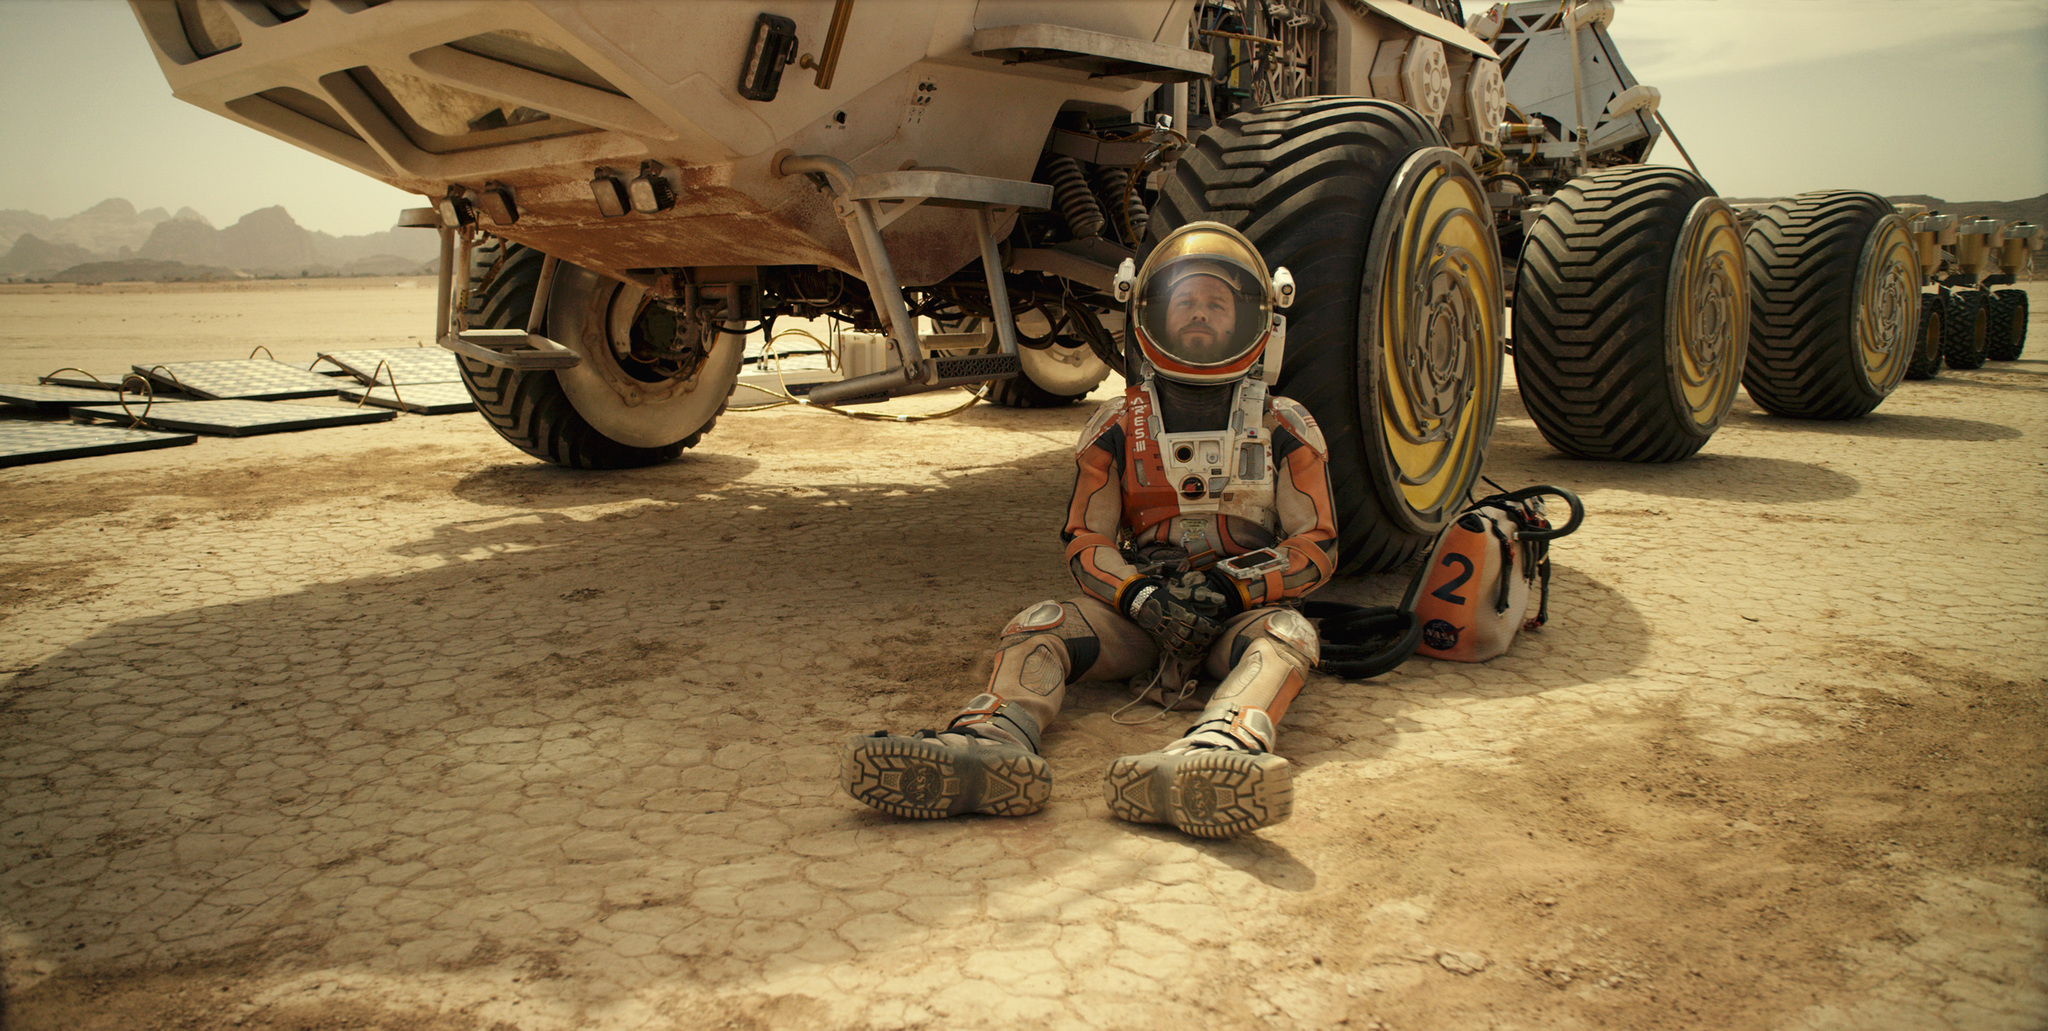 'The Martian' review: Matt Damon is stranded and alone on Mars in The Martian